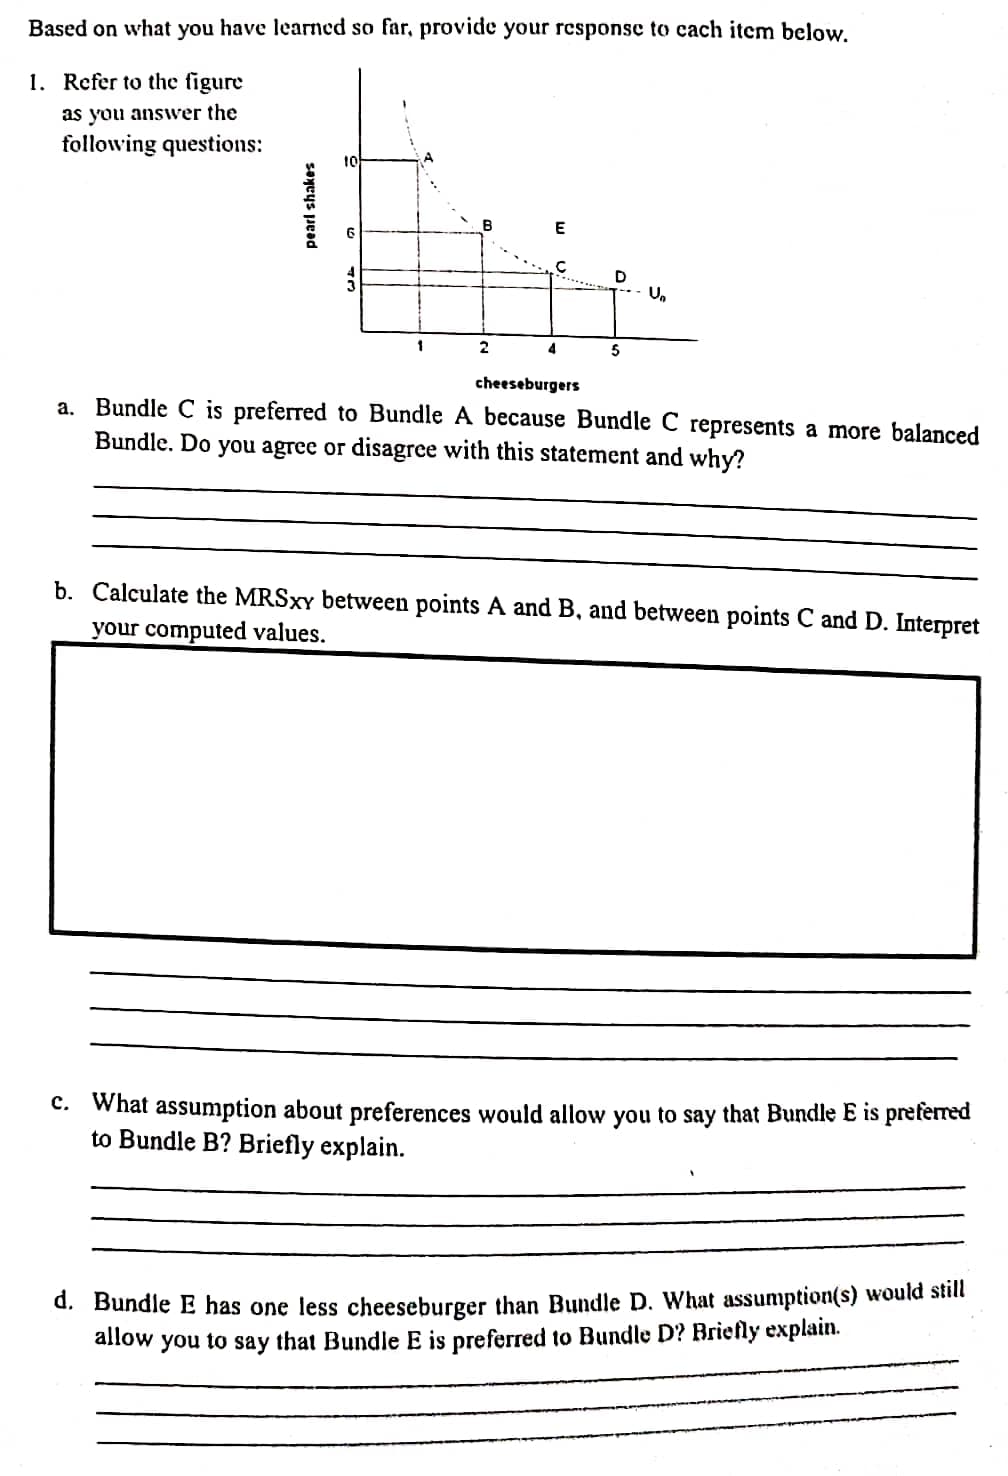 Based on what you have learned so far, provide your response to cach item below.
1. Refer to the figure
as you ansver the
following questions:
E
D
1
2
4
5
cheeseburgers
a. Bundle C is preferred to Bundle A because Bundle C represents a more balanced
Bundle. Do you agree or disagree with this statement and why?
b. Calculate the MRSXY between points A and B, and between points C and D. Interpret
your computed values.
C. What assumption about preferences would allow you to say that Bundle E is preferred
to Bundle B? Briefly explain.
d. Bundle E has one less cheeseburger than Bundle D. What assumption(s) would still
allow
to
that Bundle E is preferred to Bundle D? Briefly explain.
you
say
pearl shakes
